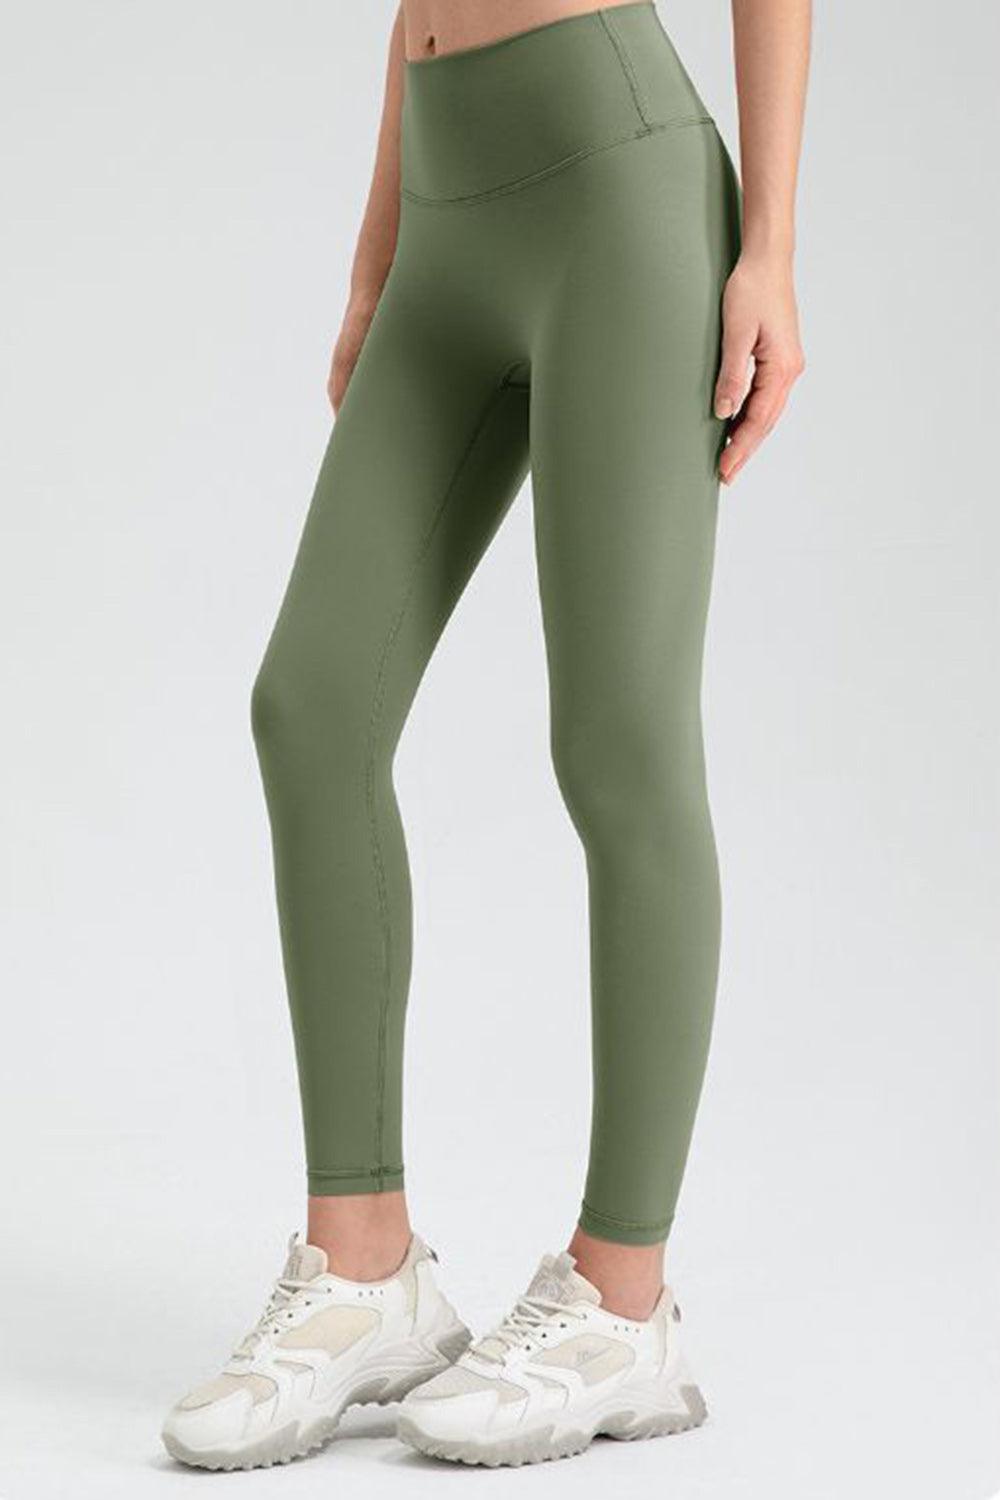 a woman in green leggings with a white top